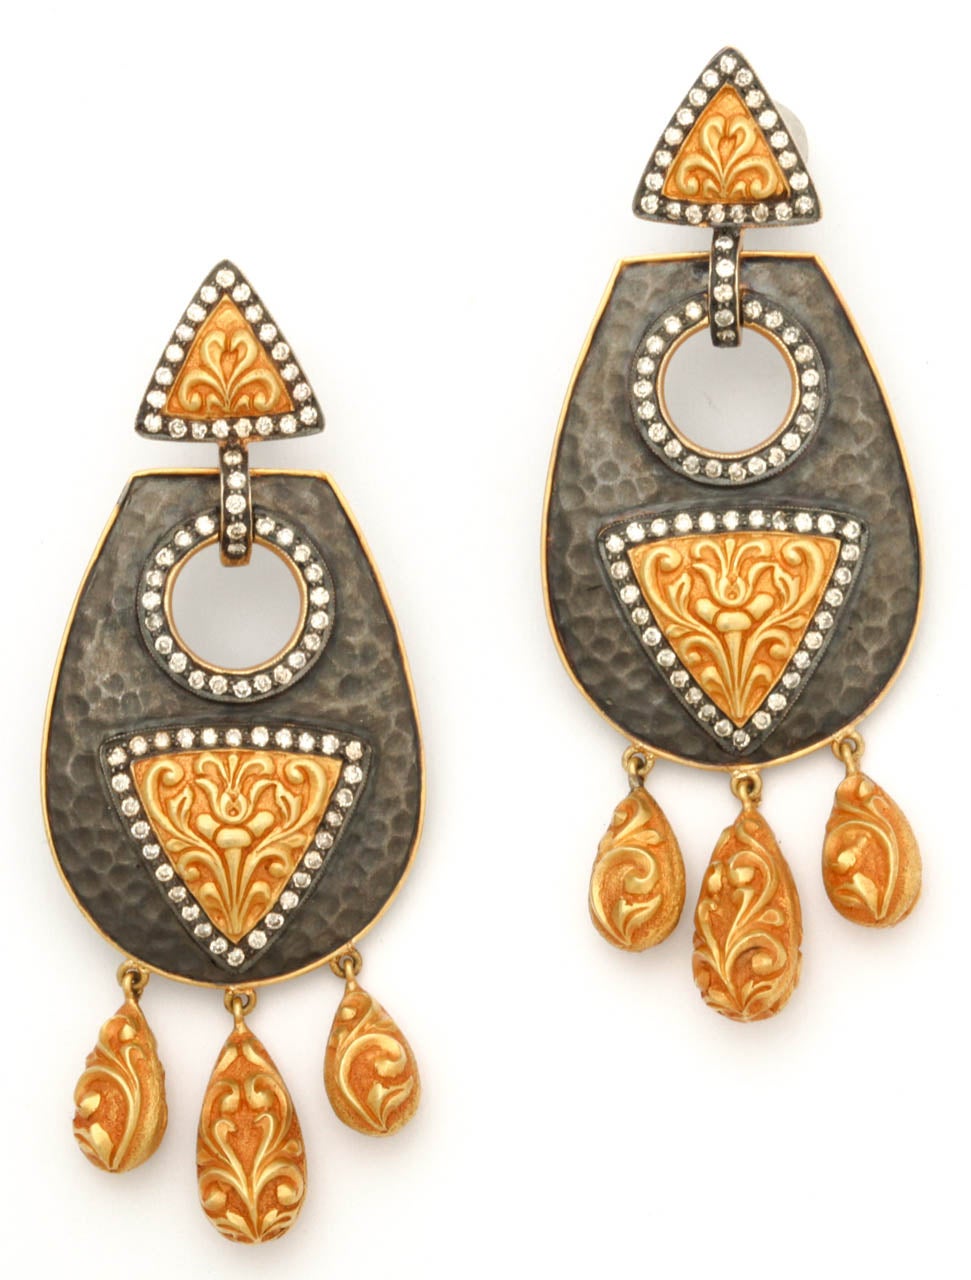 A pair of 18kt yellow gold, rhodium plated sterling silver and diamond earrings. The earrings are composed of hand hammered sterling silver shields which have been adorned with 18kt yellow gold decorative floral plaques and diamonds. There are 18kt